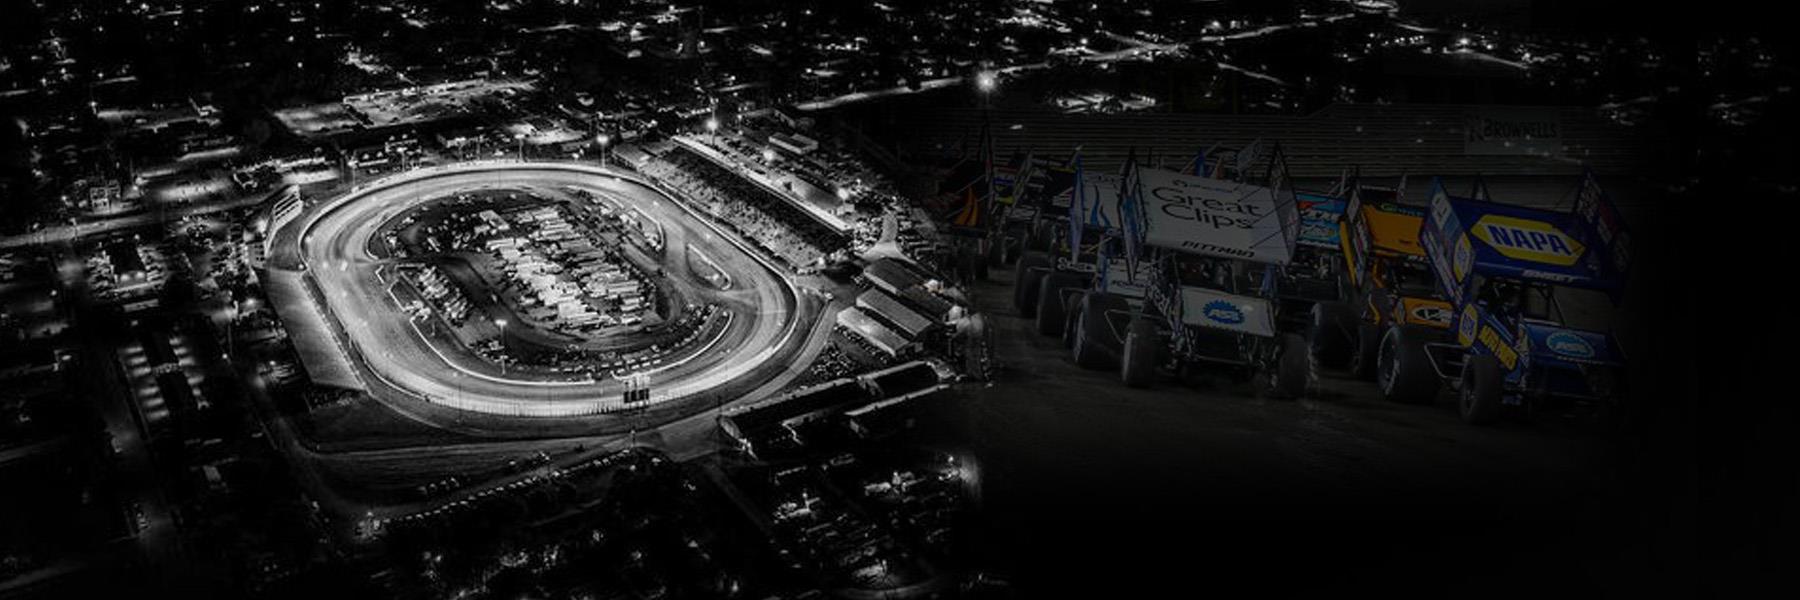 6/11/2022 - Knoxville Raceway